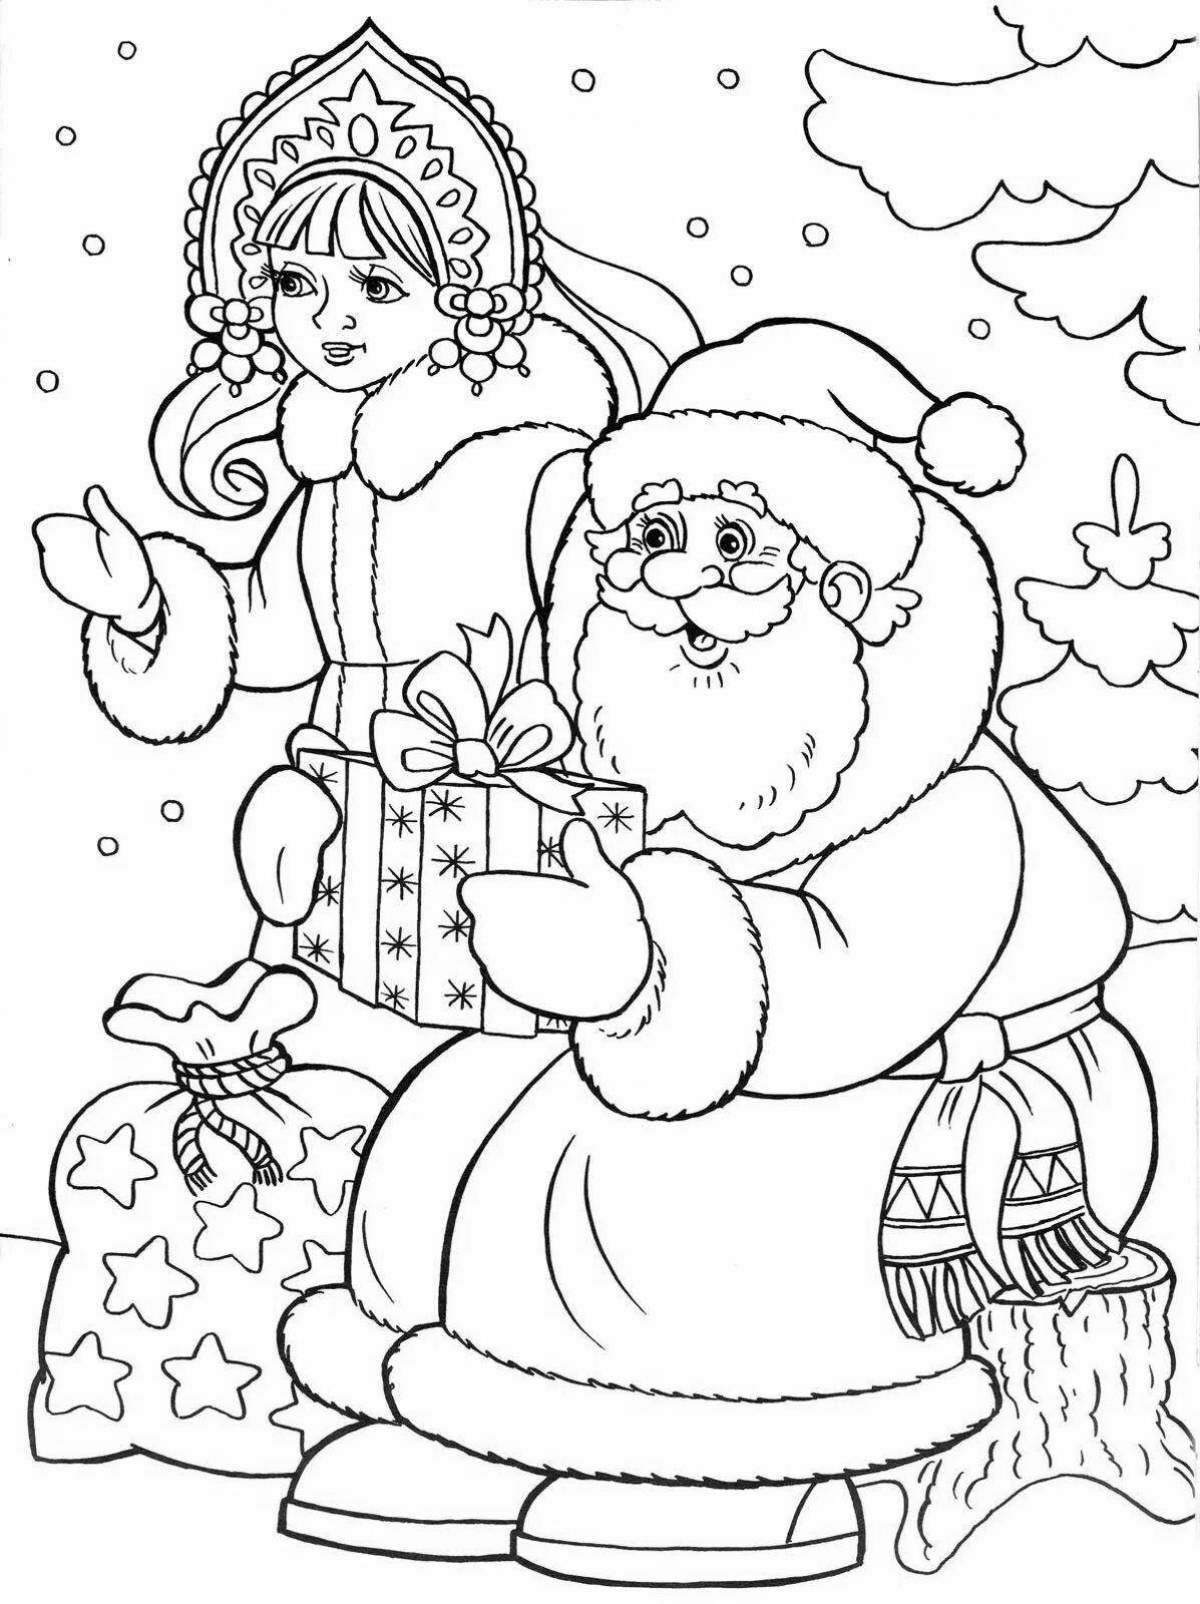 Sparkling frost coloring book for kids